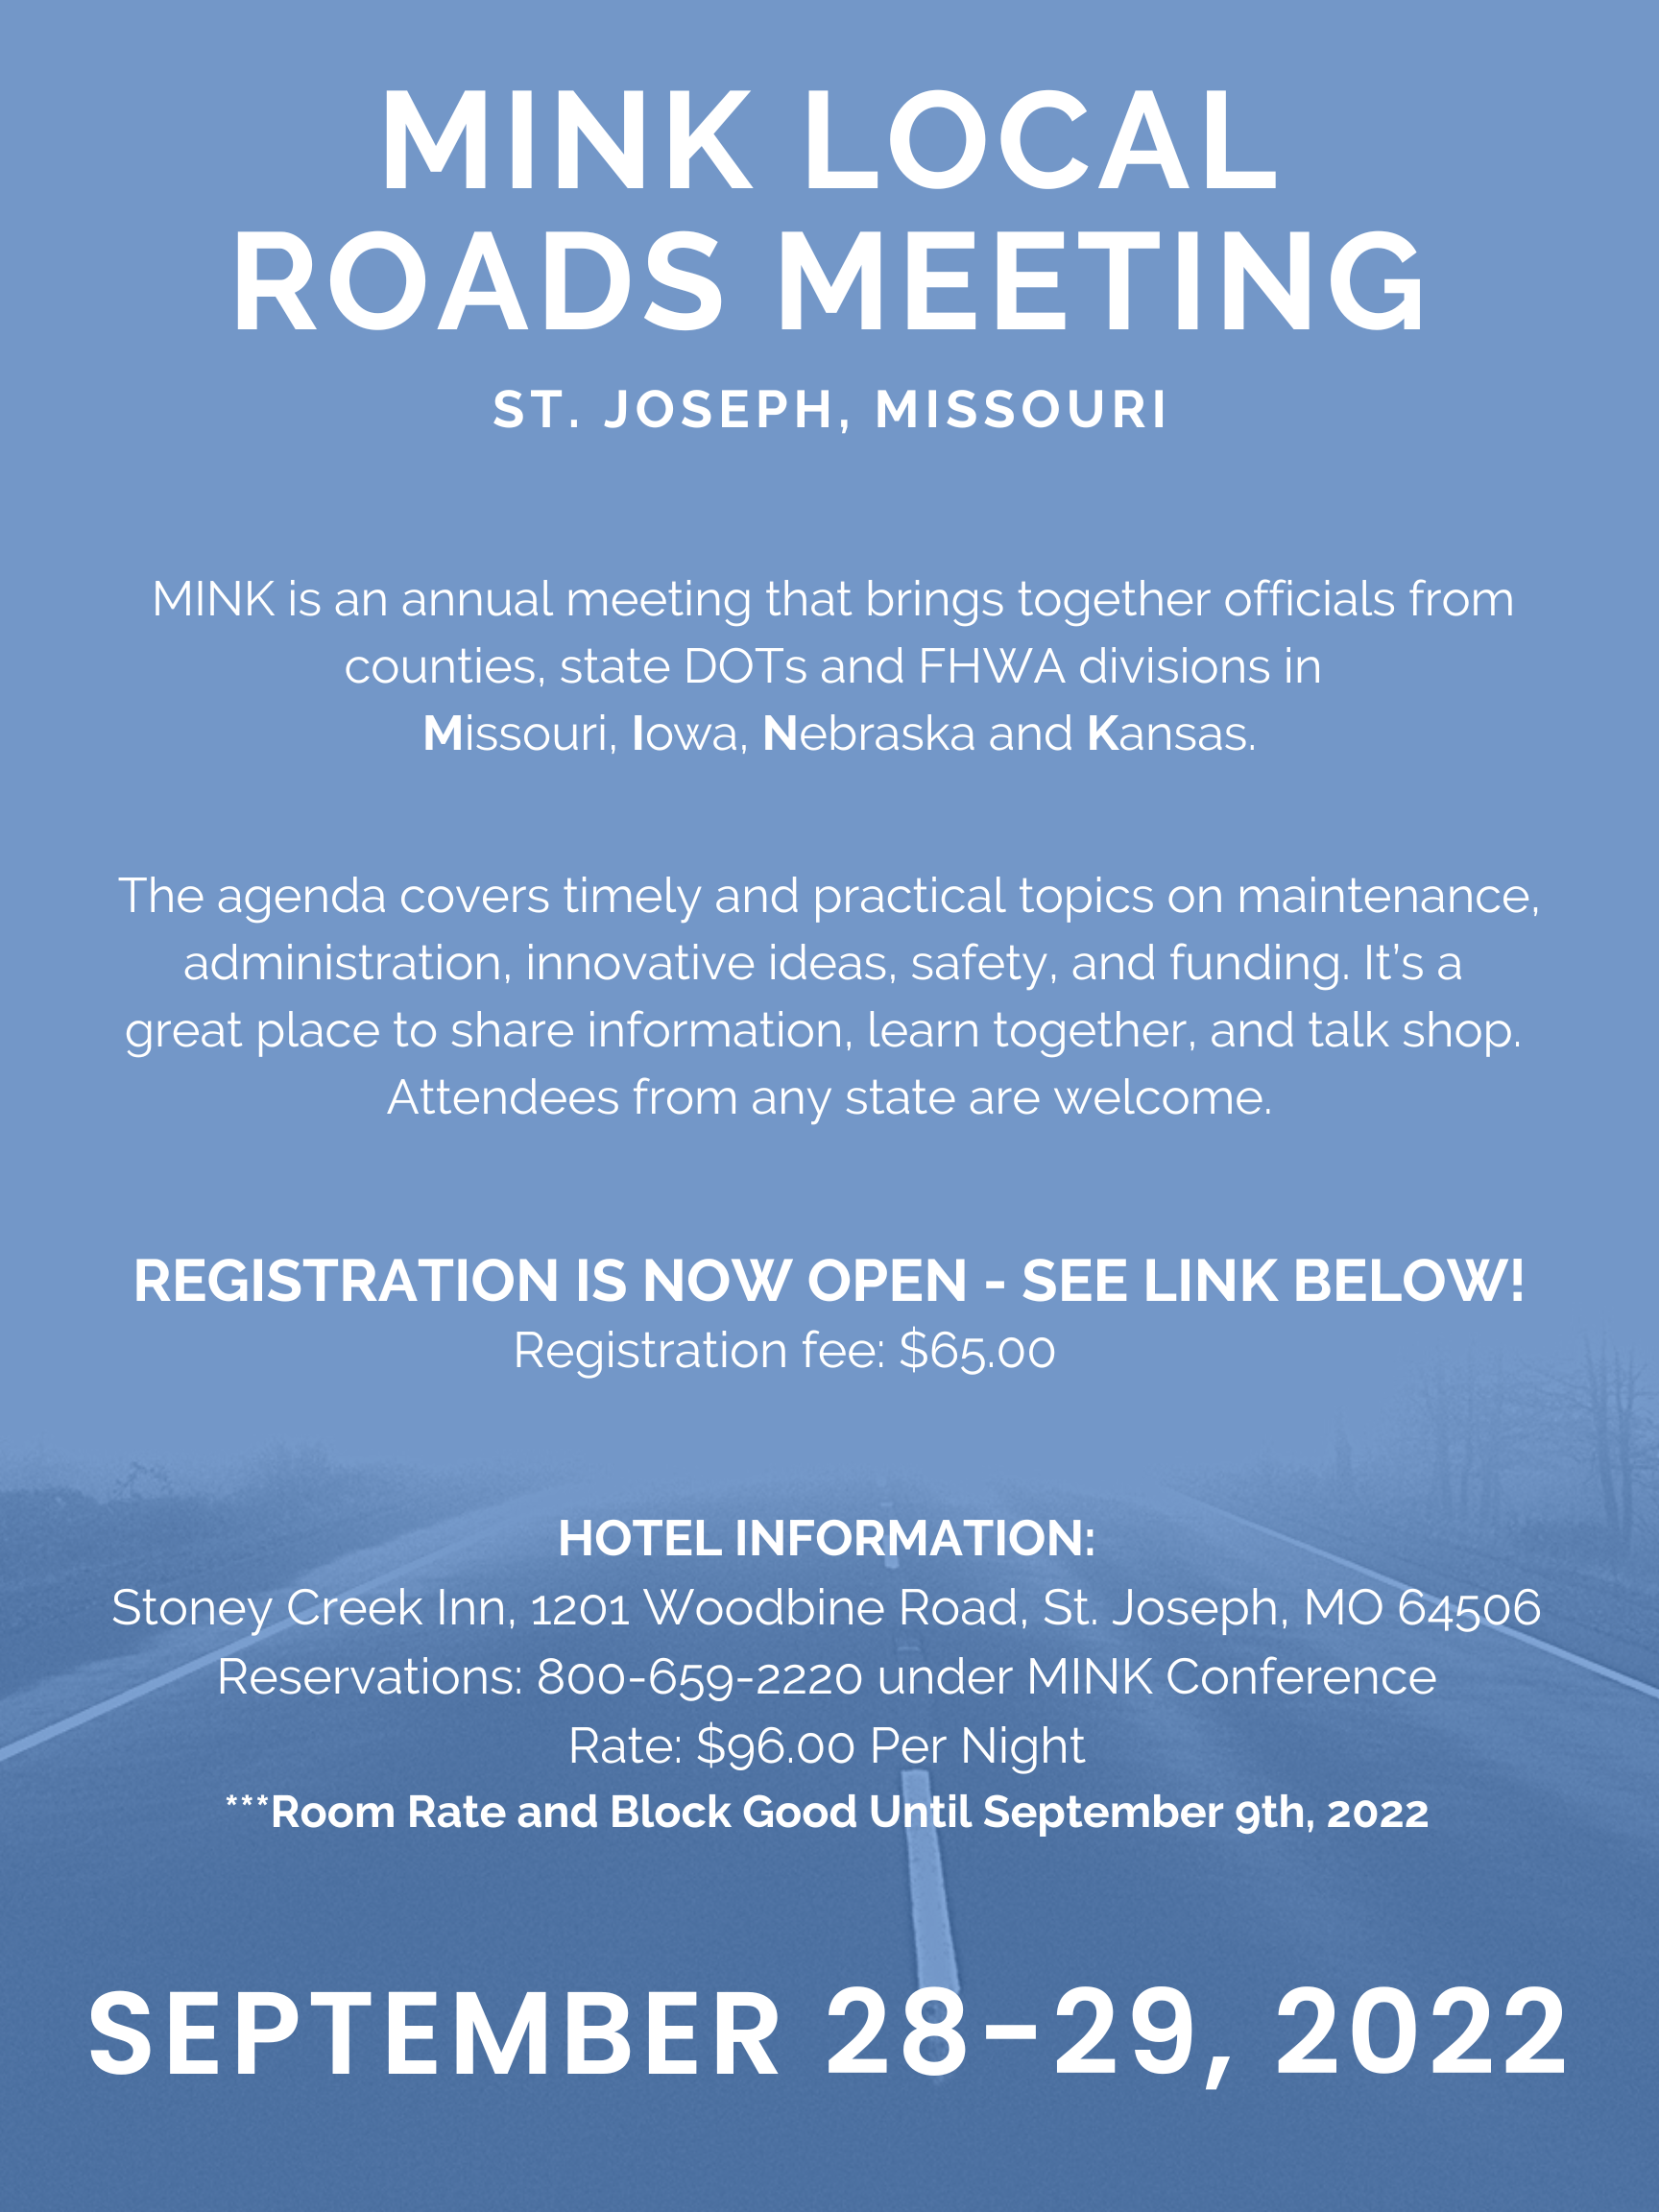 Join us at MINK for timely topics in rural transportation.